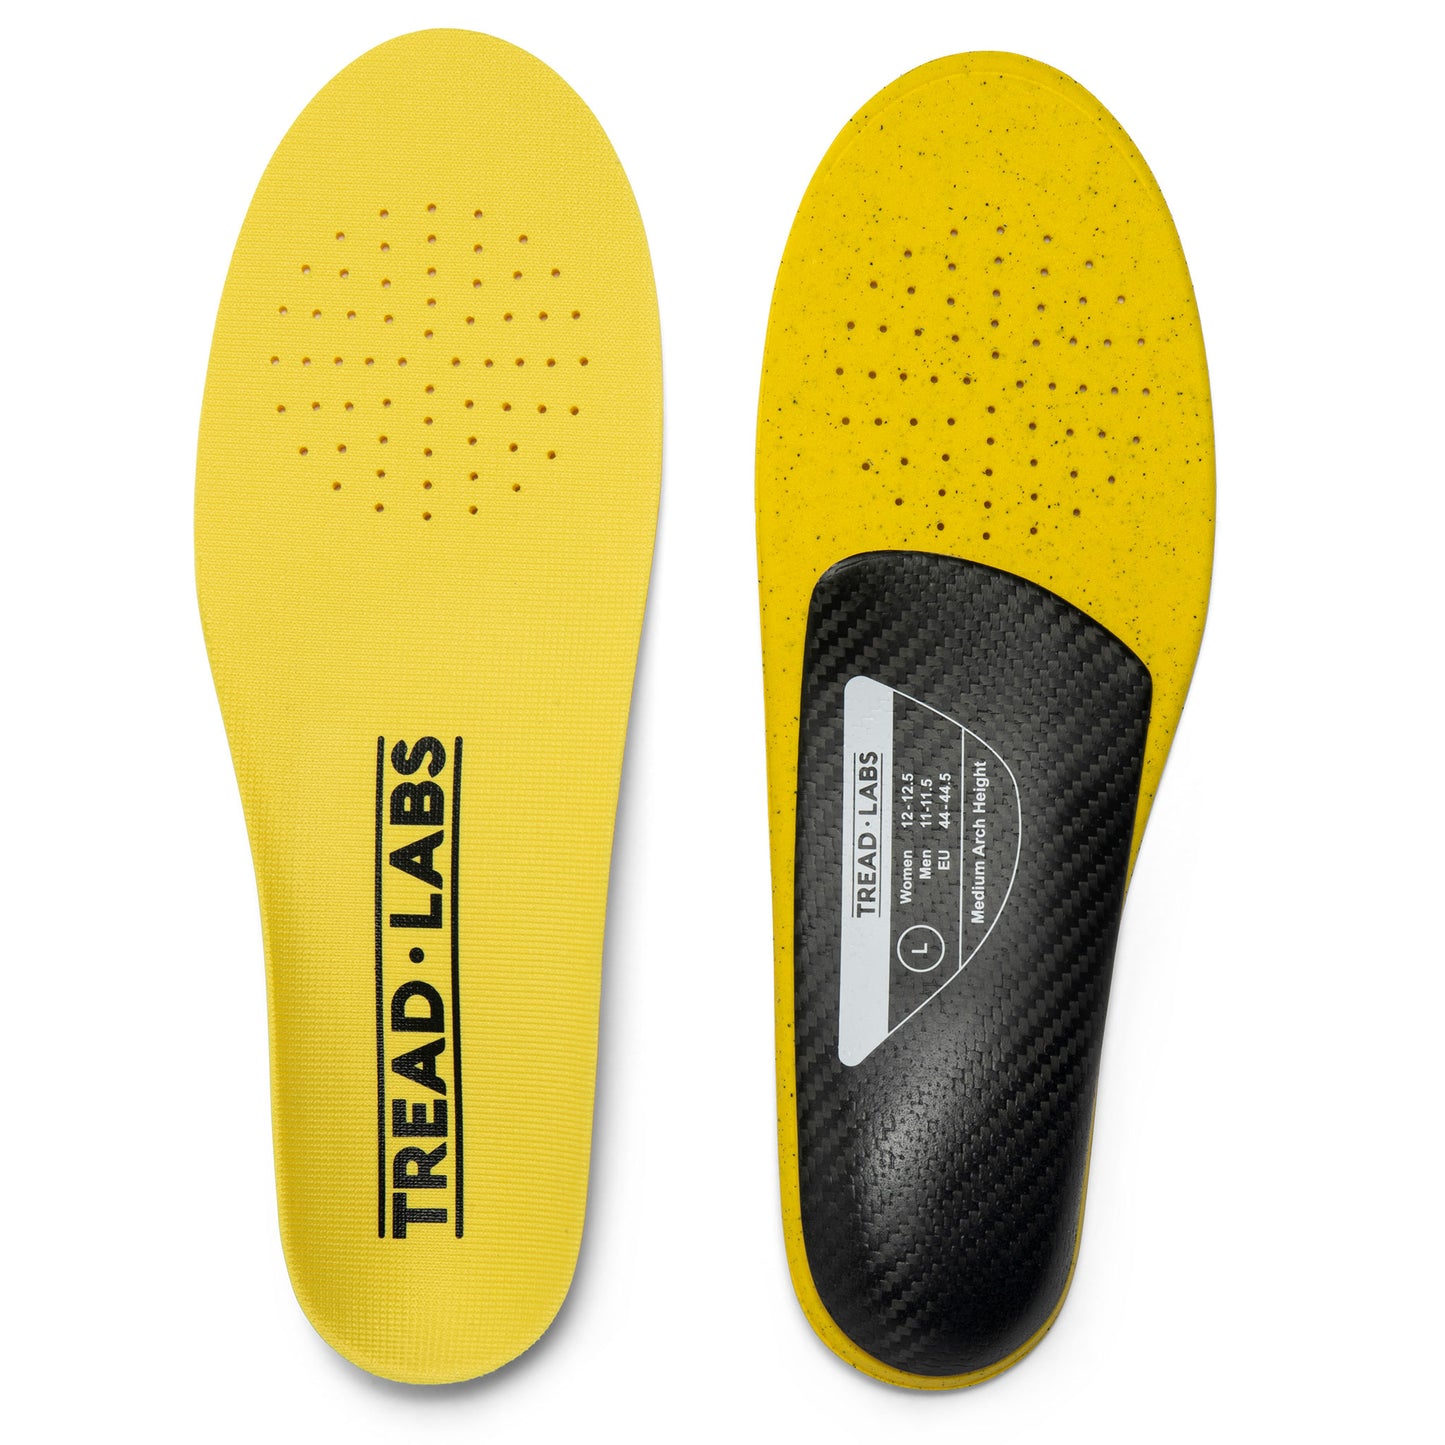 Dash Thin Insole With Carbon Fiber Arch Supports And Ventilated Top Covers